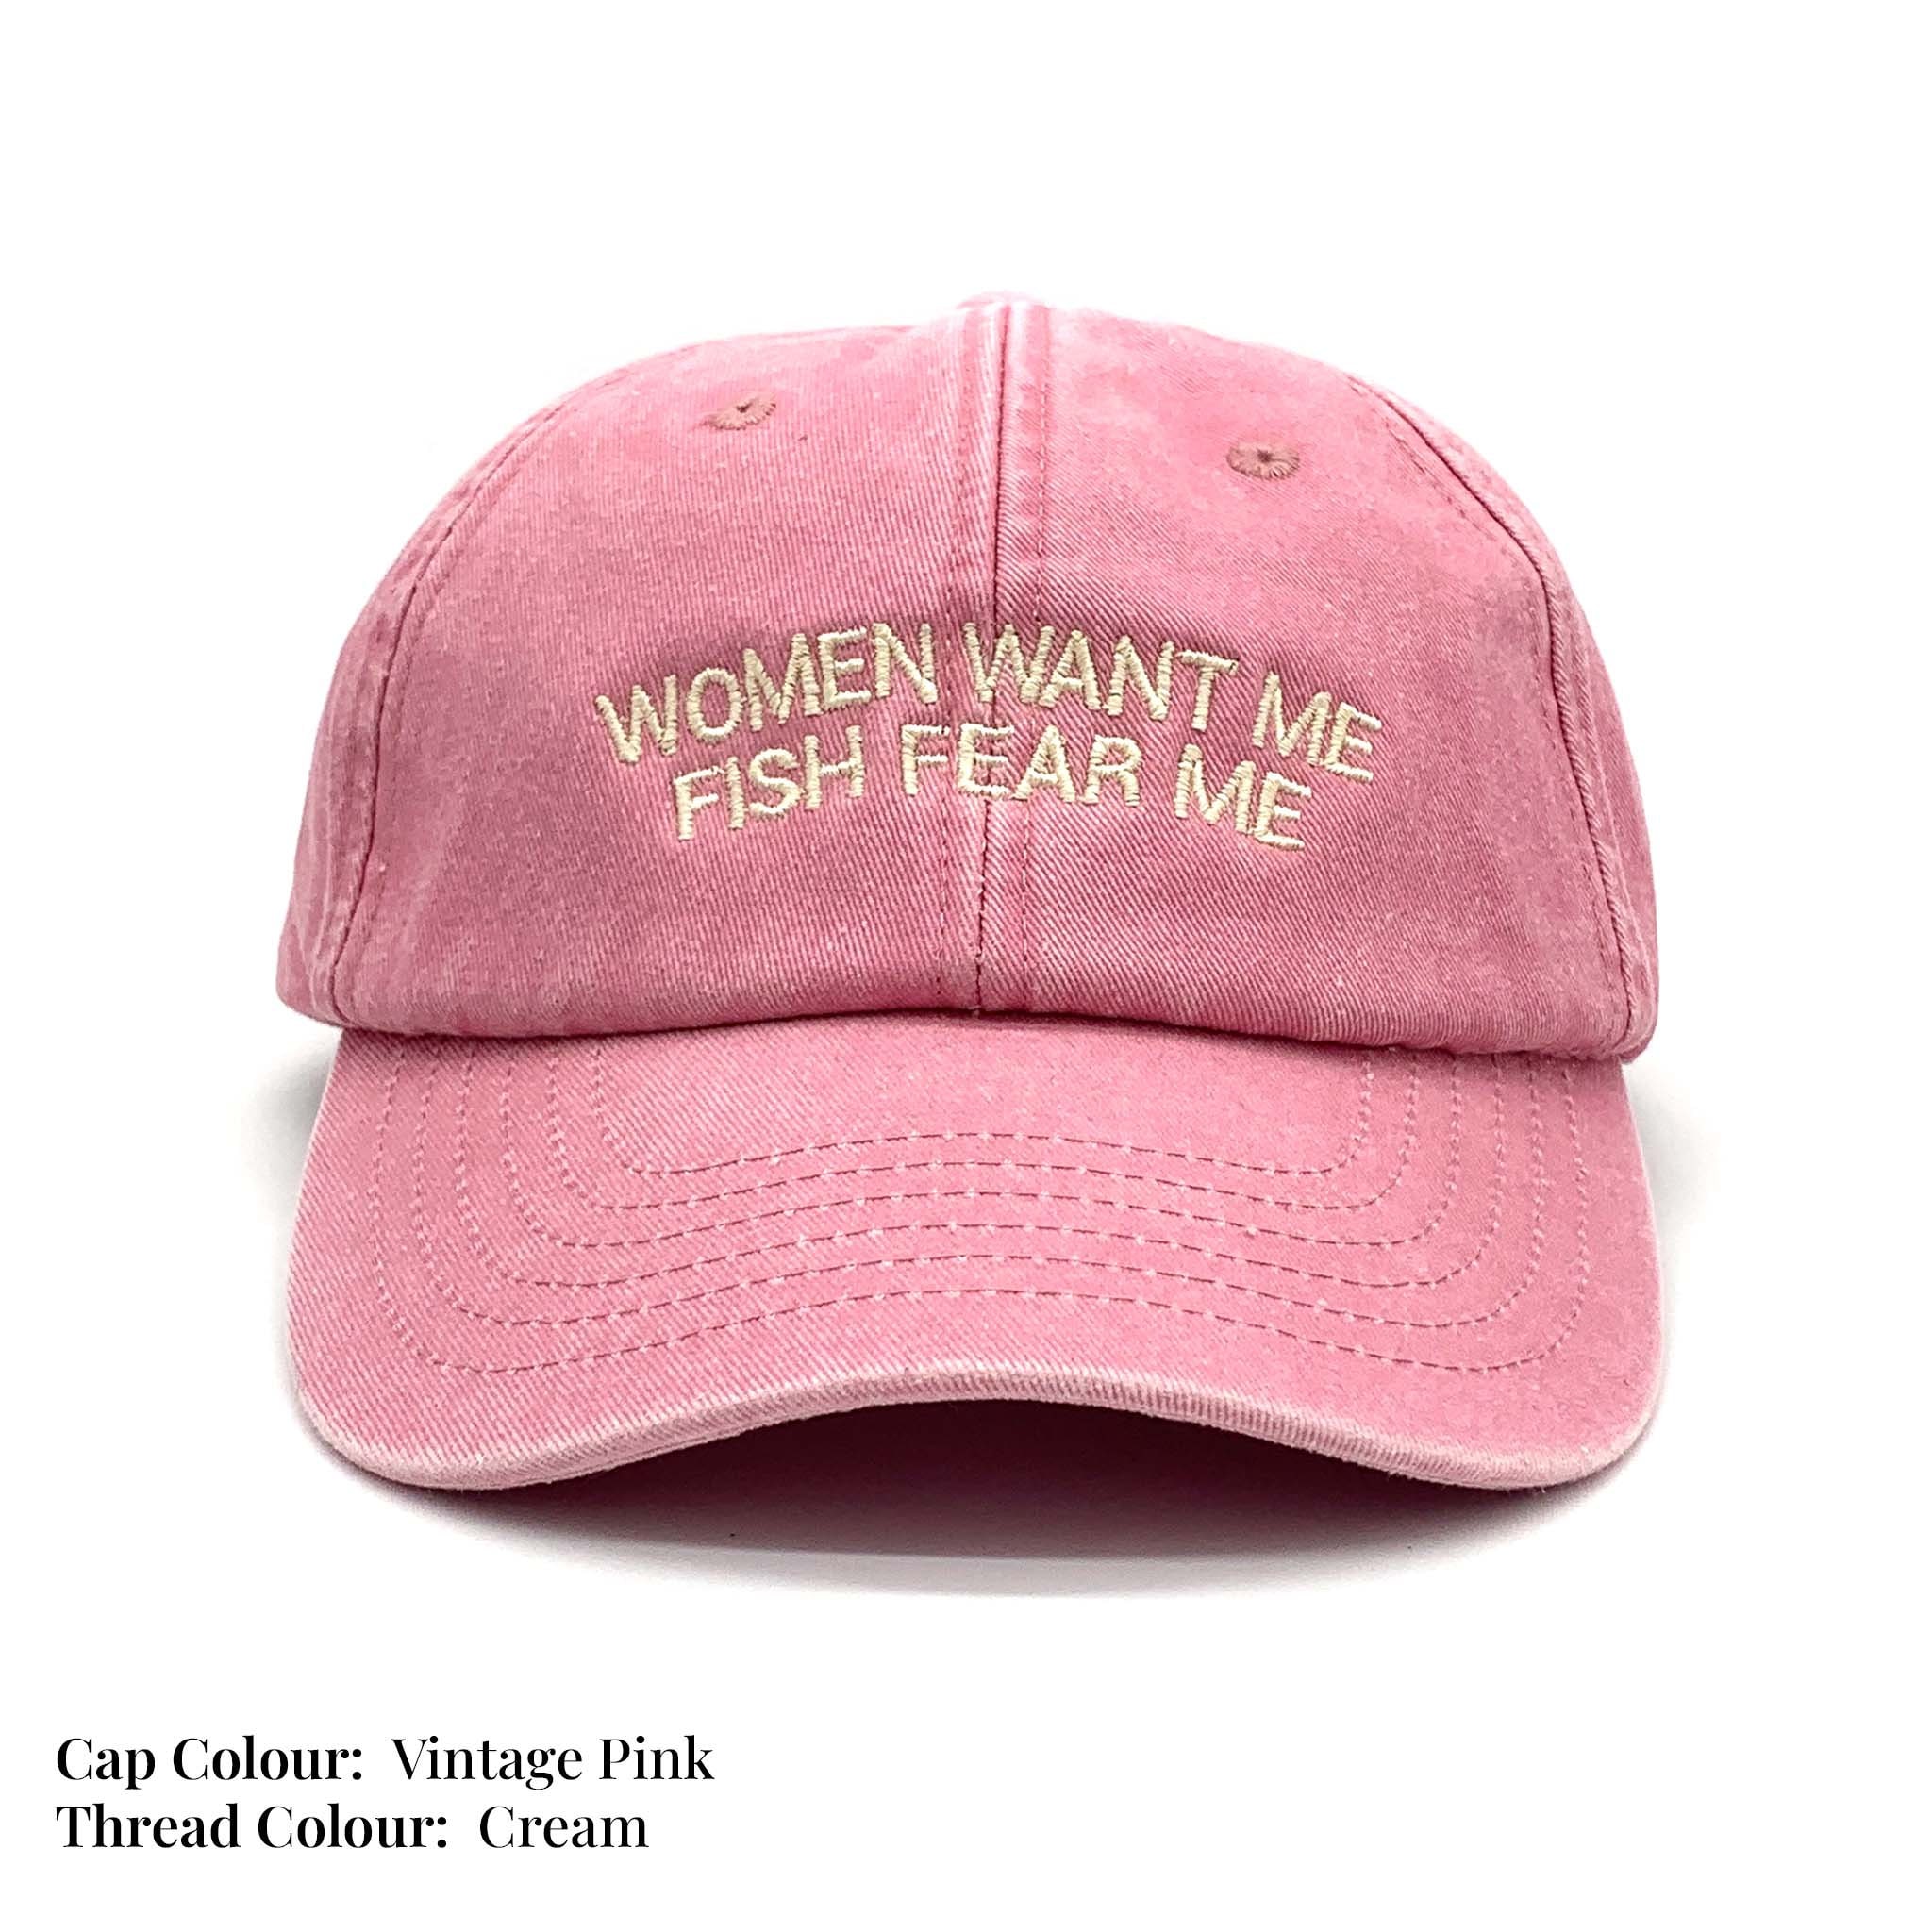 Women Want Me Fish Fear Me Embroidered Vintage Canvas Cap 